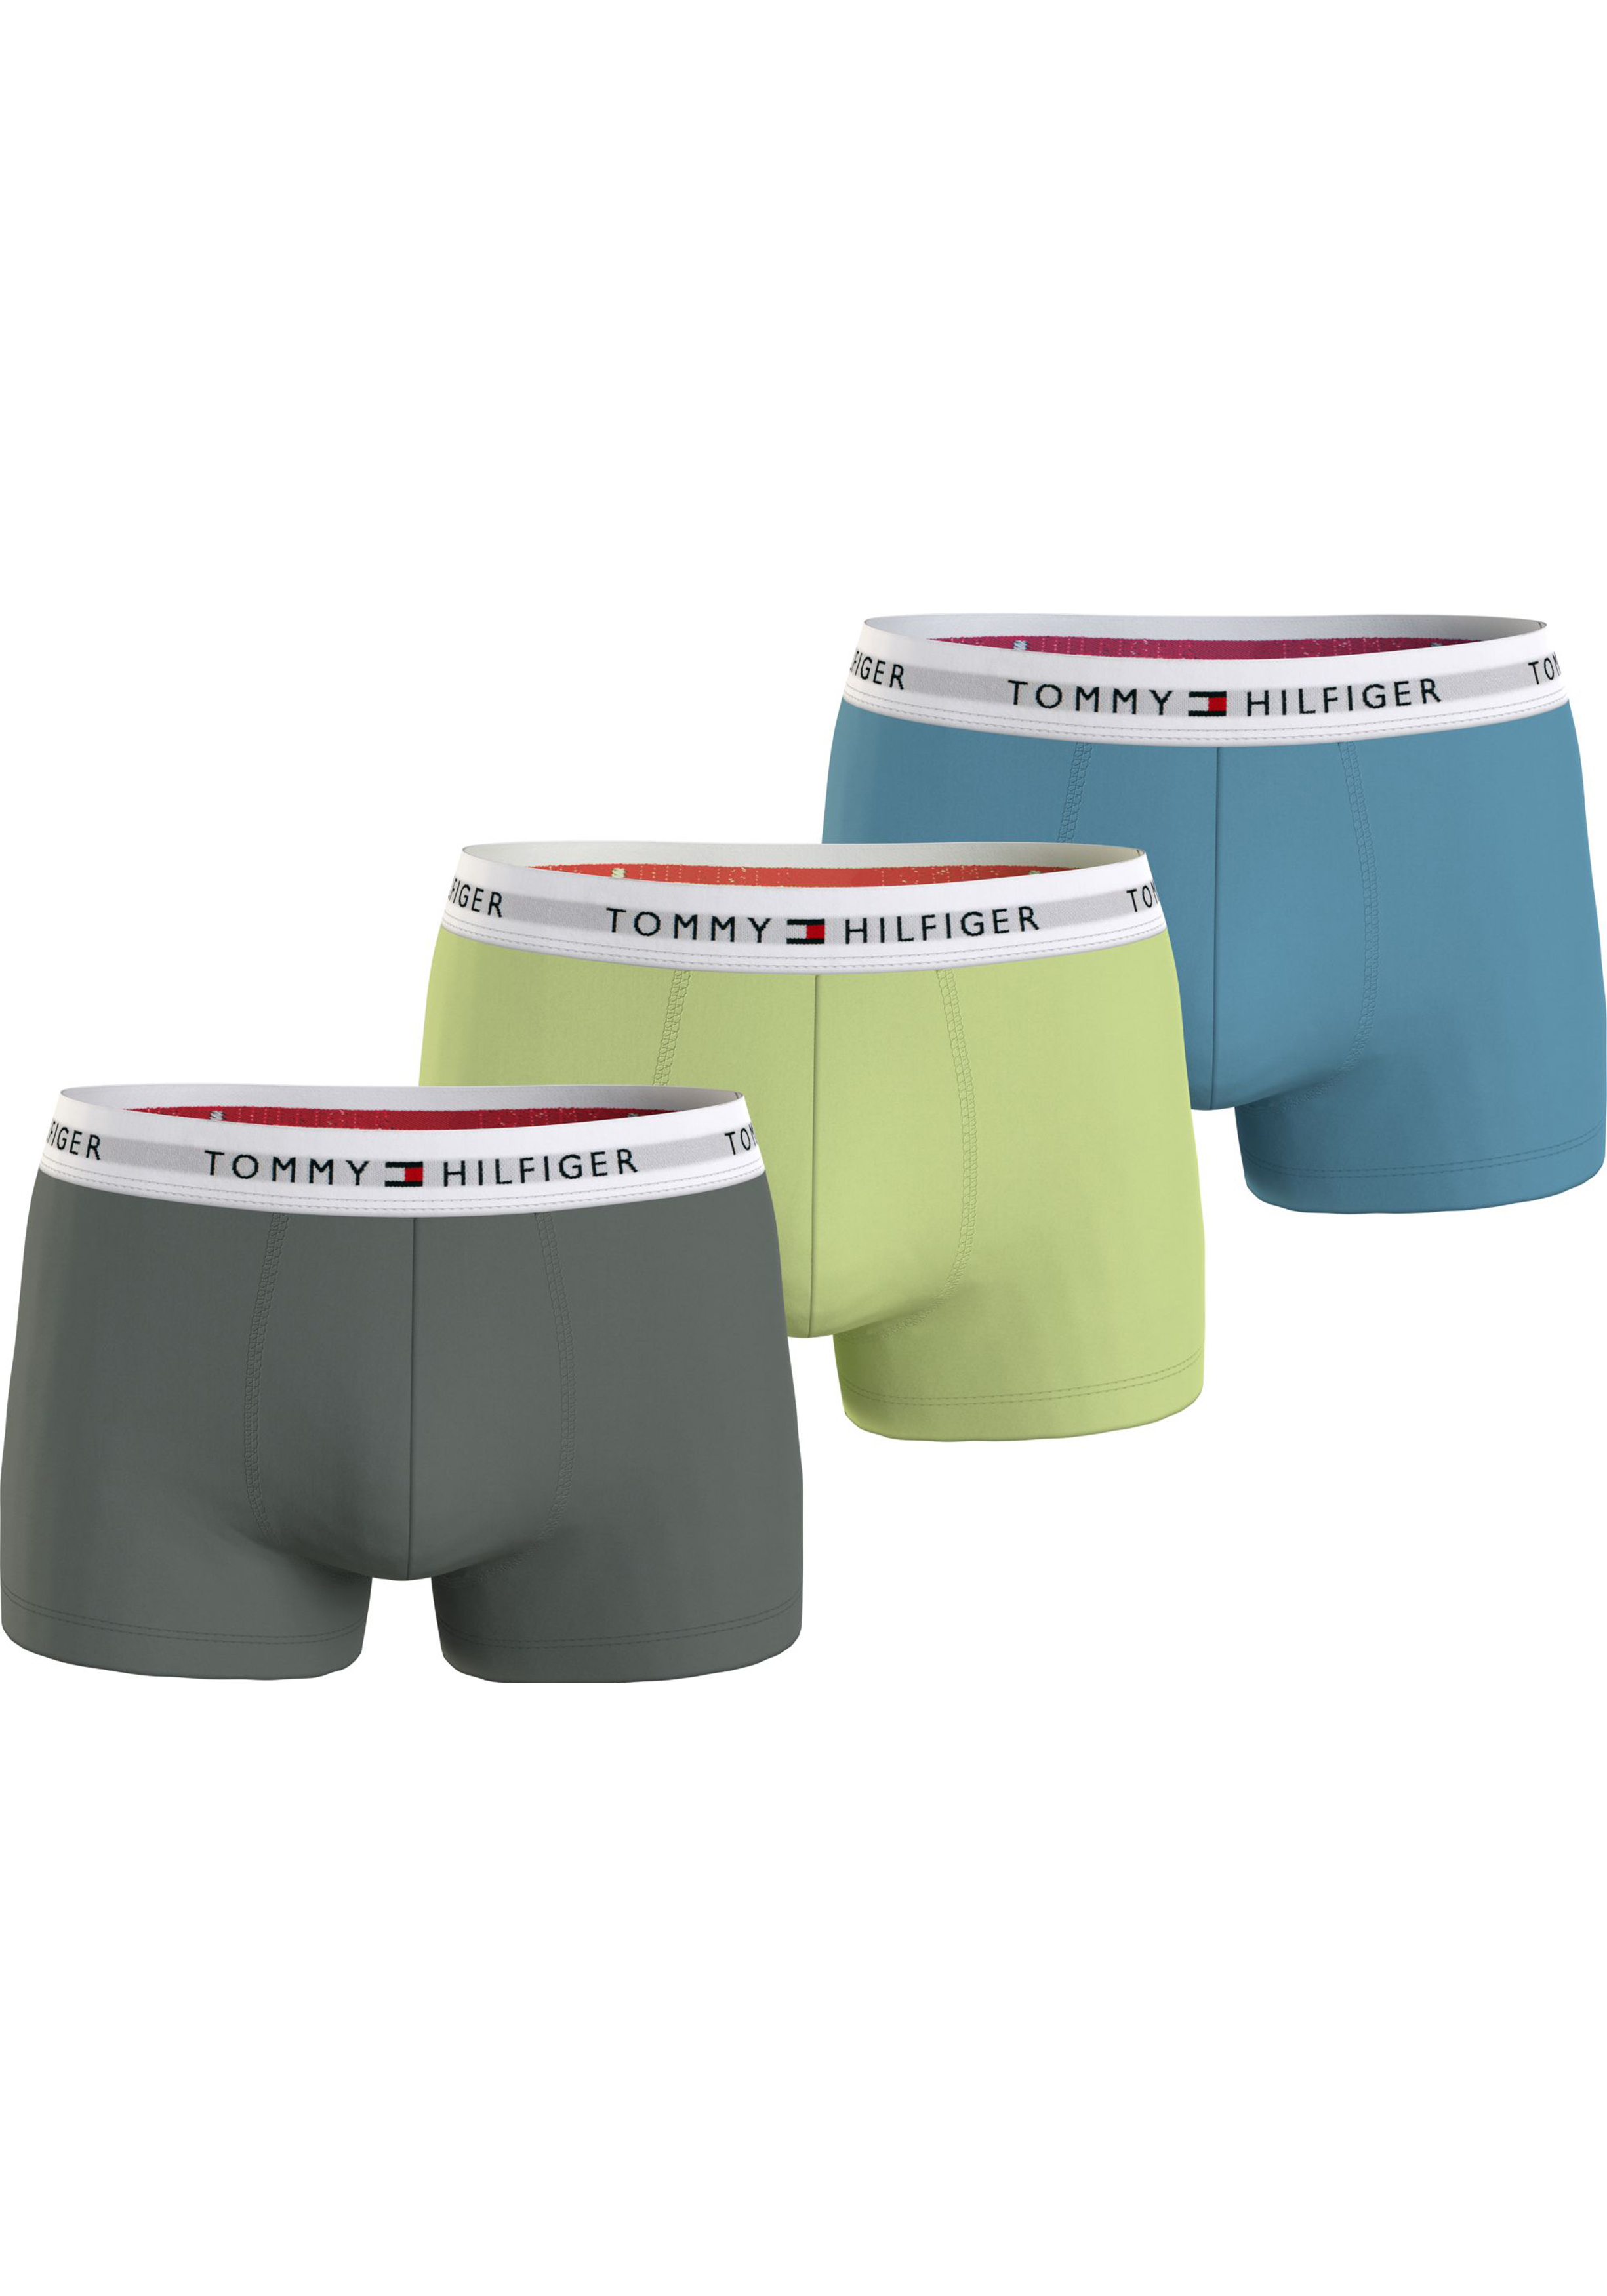 Tommy Hilfiger trunk (3-pack), heren boxers normale lengte, groen, lime, petrol